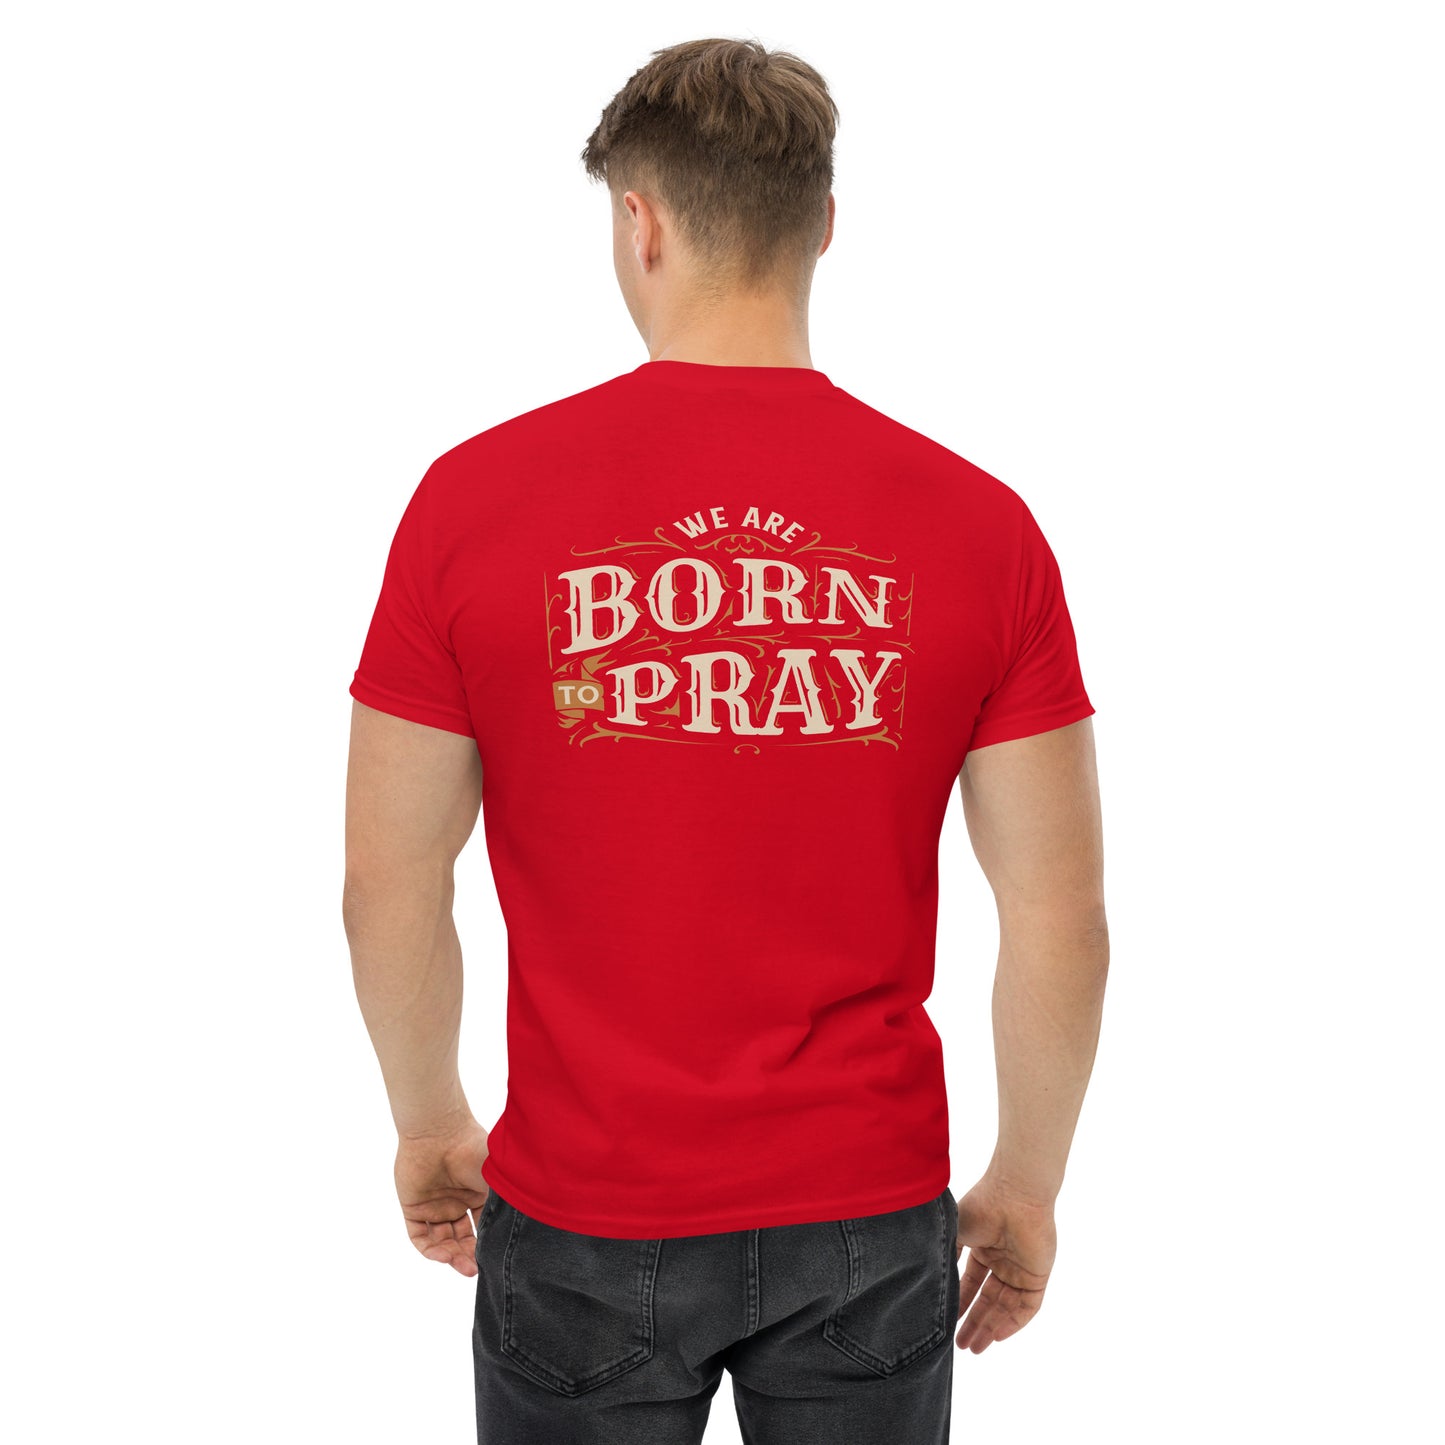 We Are Born to Pray (Back)